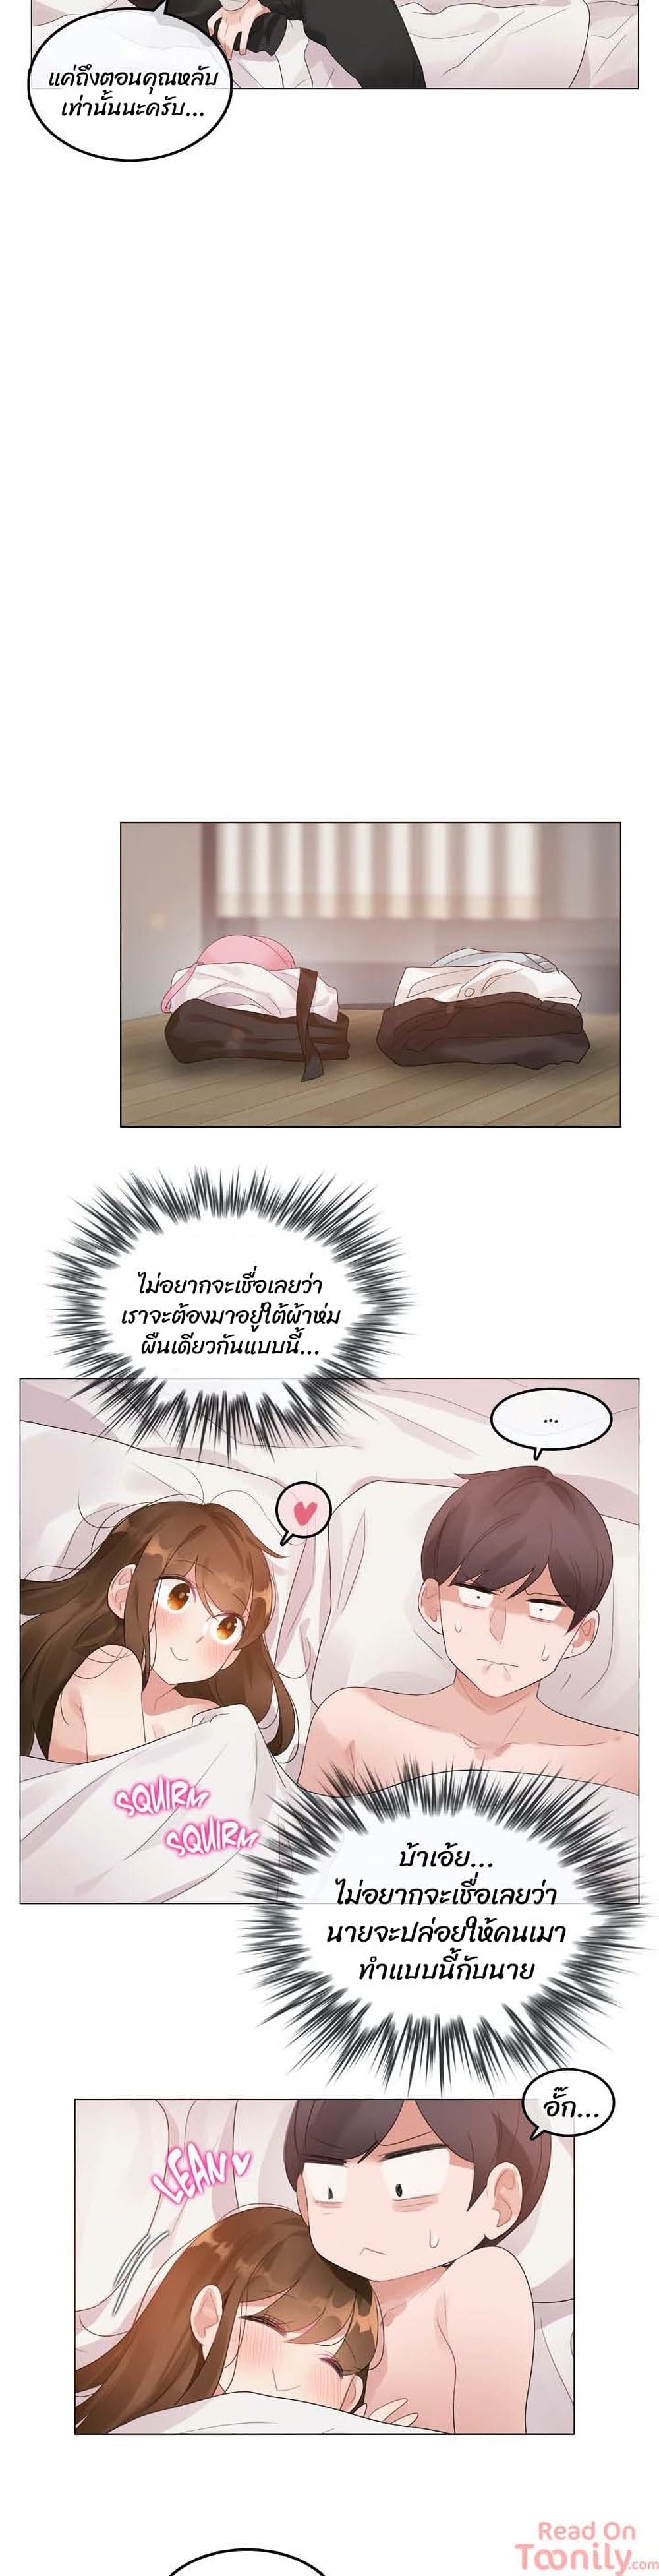 A Pervert's Daily Life 80 (15)